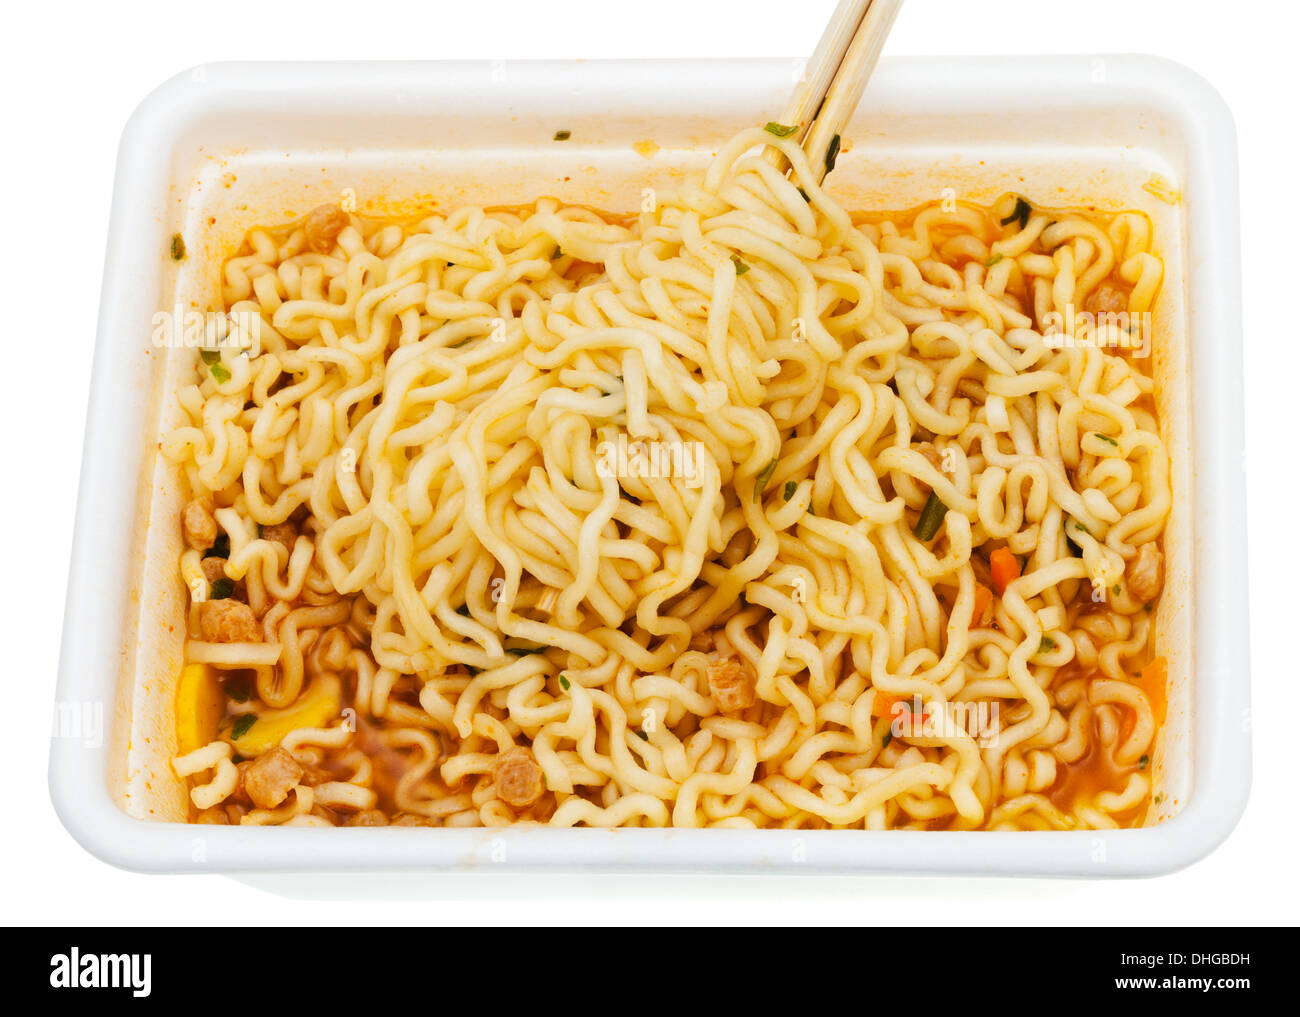 eating of instant noodles by wooden chopsticks from lunch box isolated on white background Stock Photo